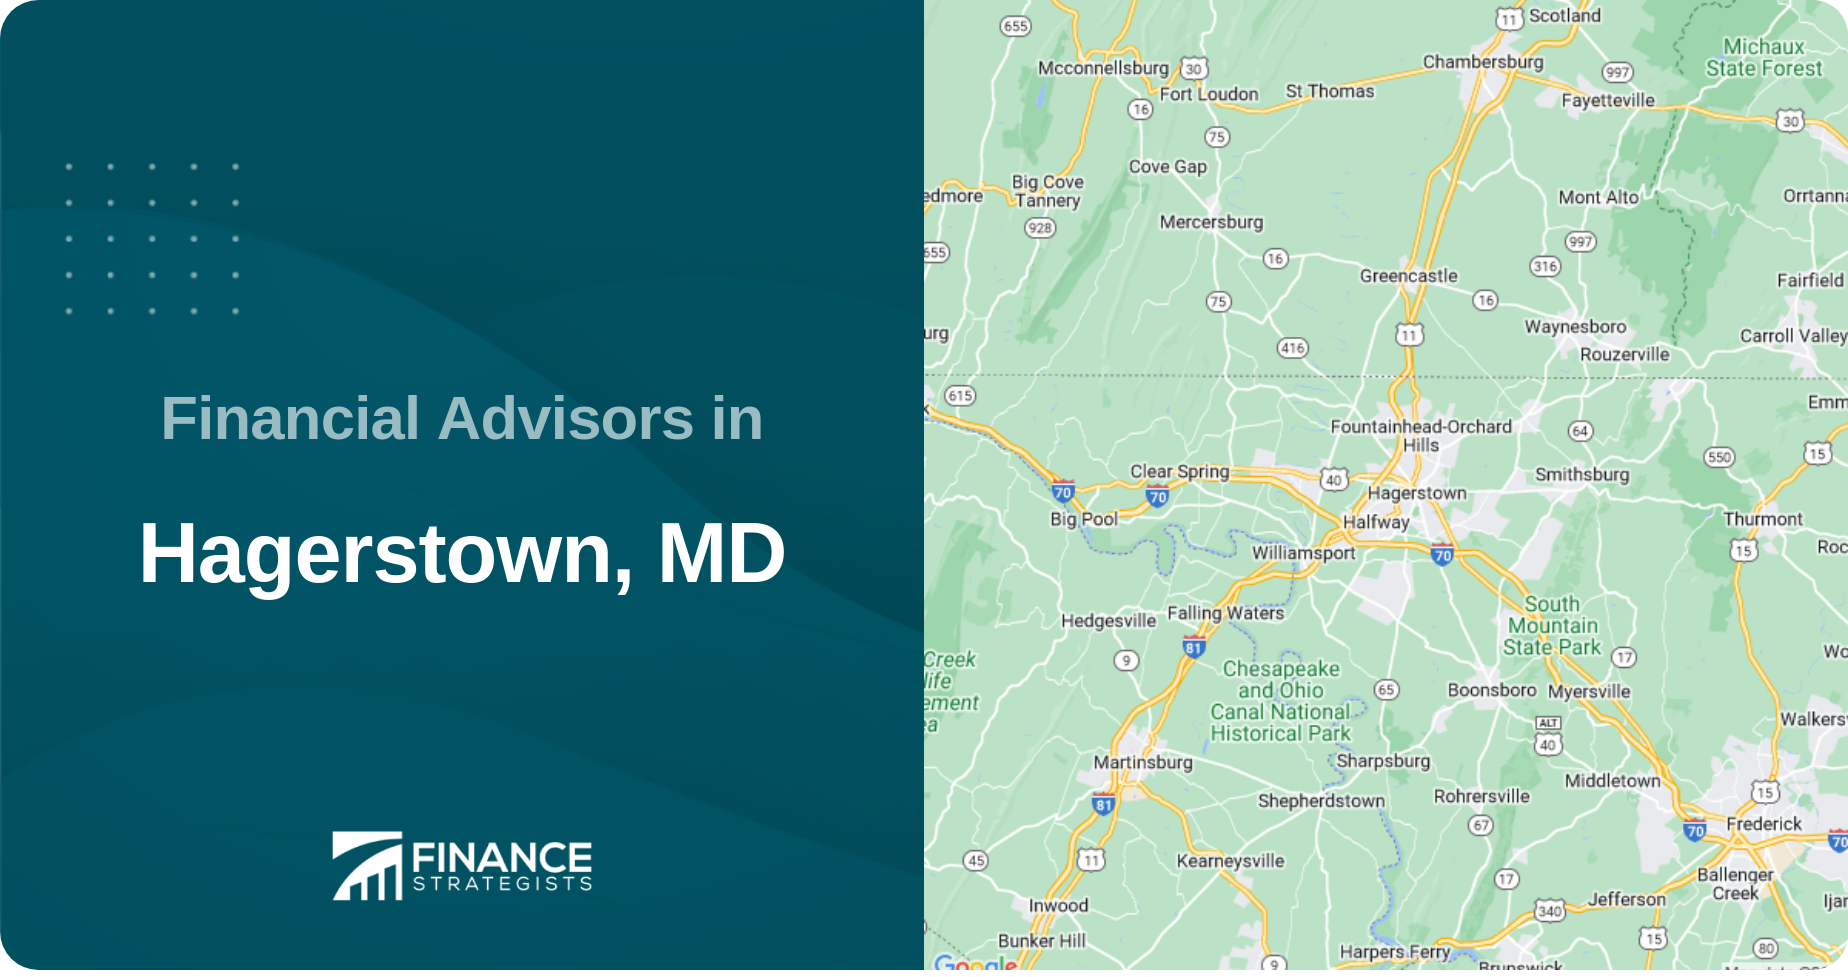 Financial Advisors in Hagerstown, MD